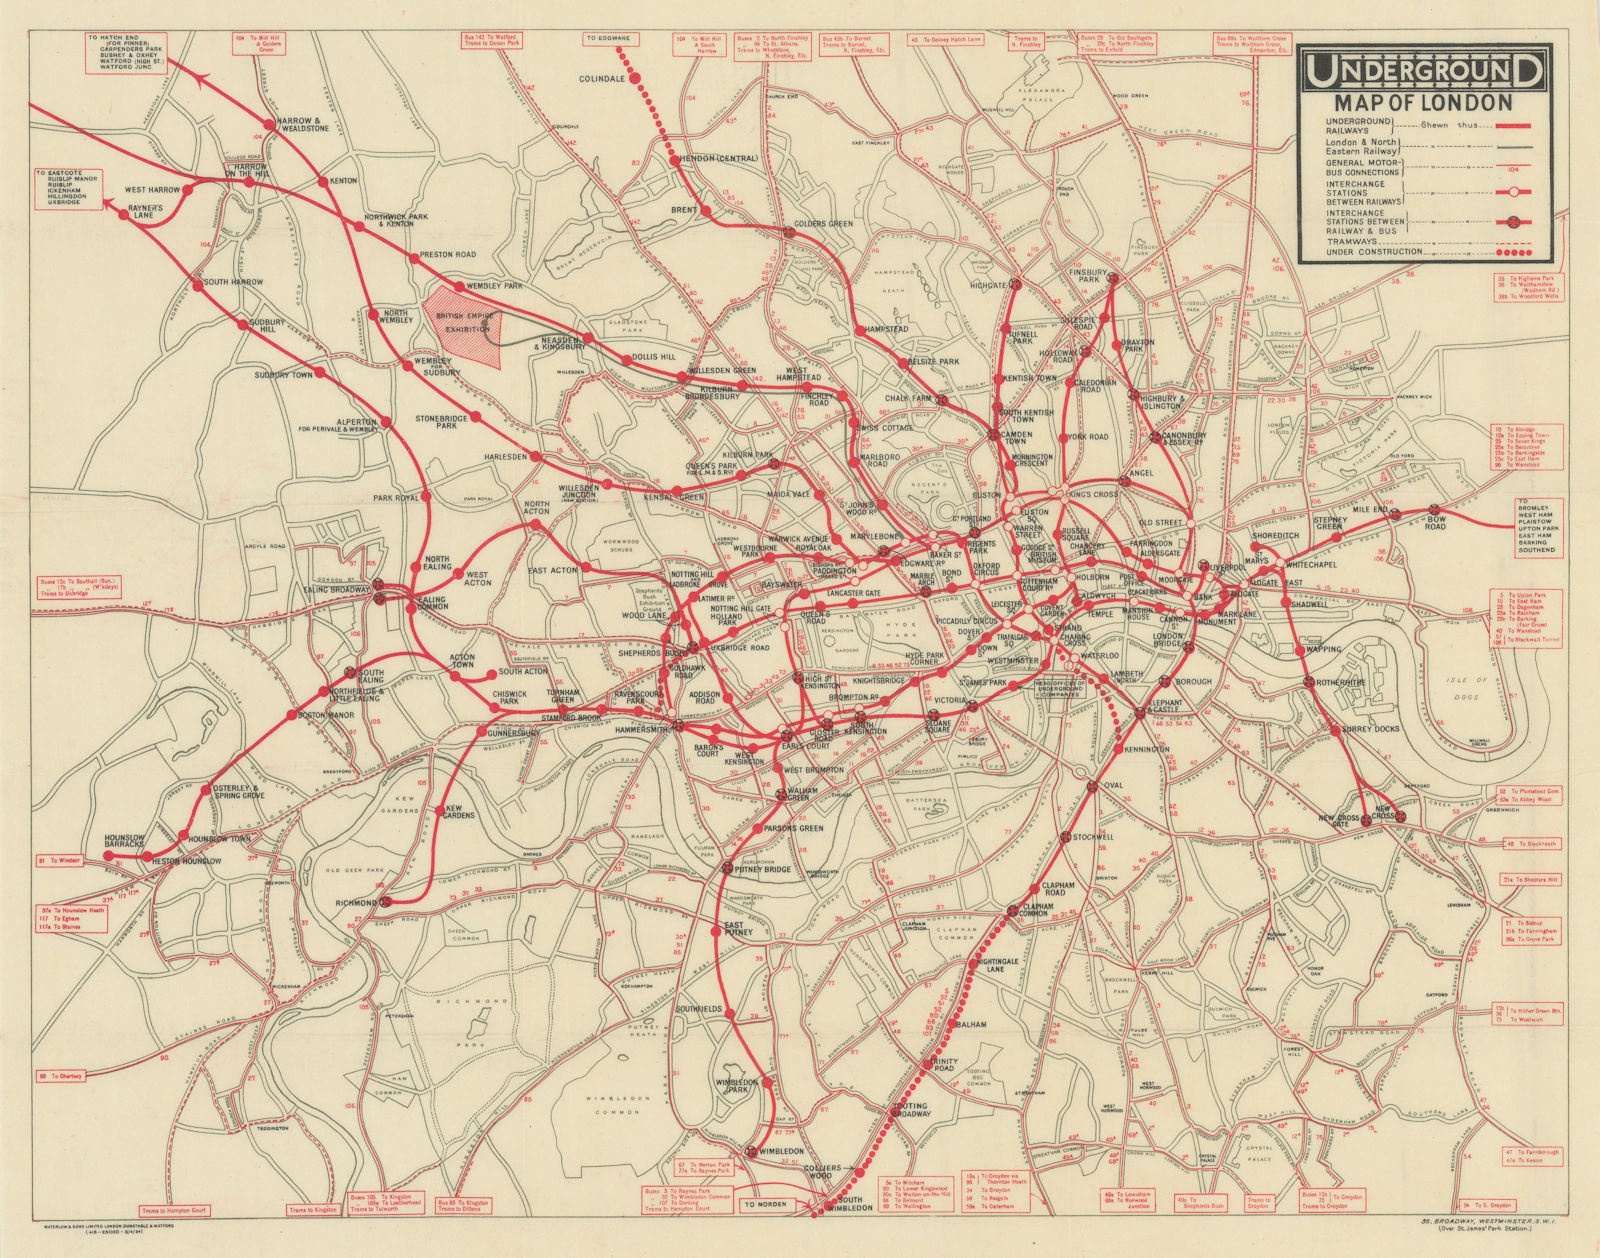 Underground Map of London. Tube network. Print code 419-25000-3/4/24. April 1924